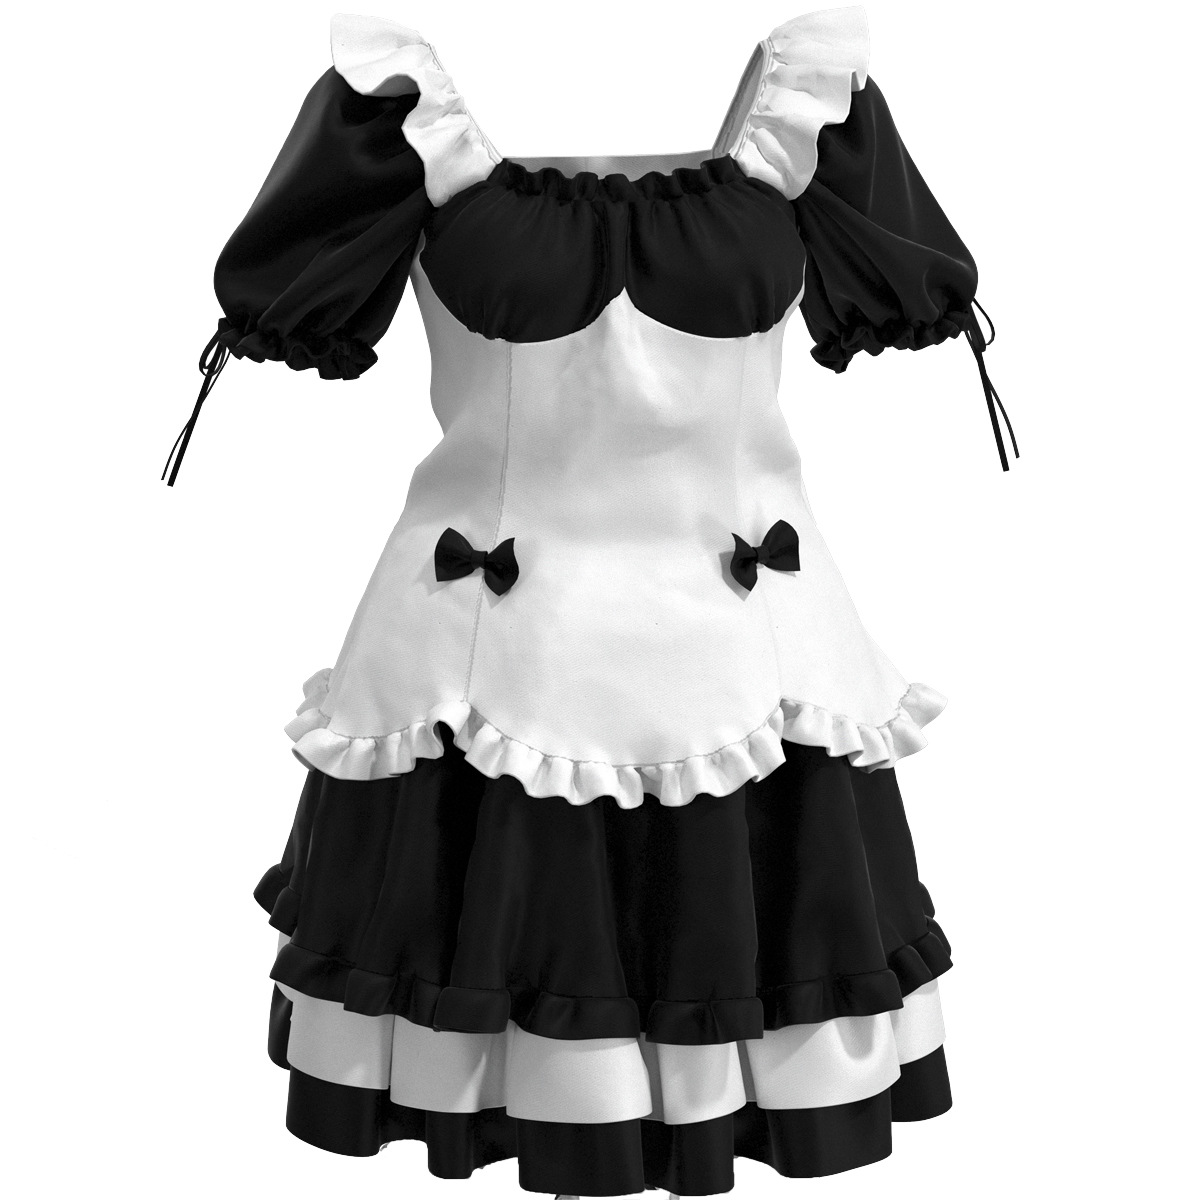 Game Clothing cosplay Miracle Warm Around the World black and white chocolate Maid outfit lolita Princess Dress